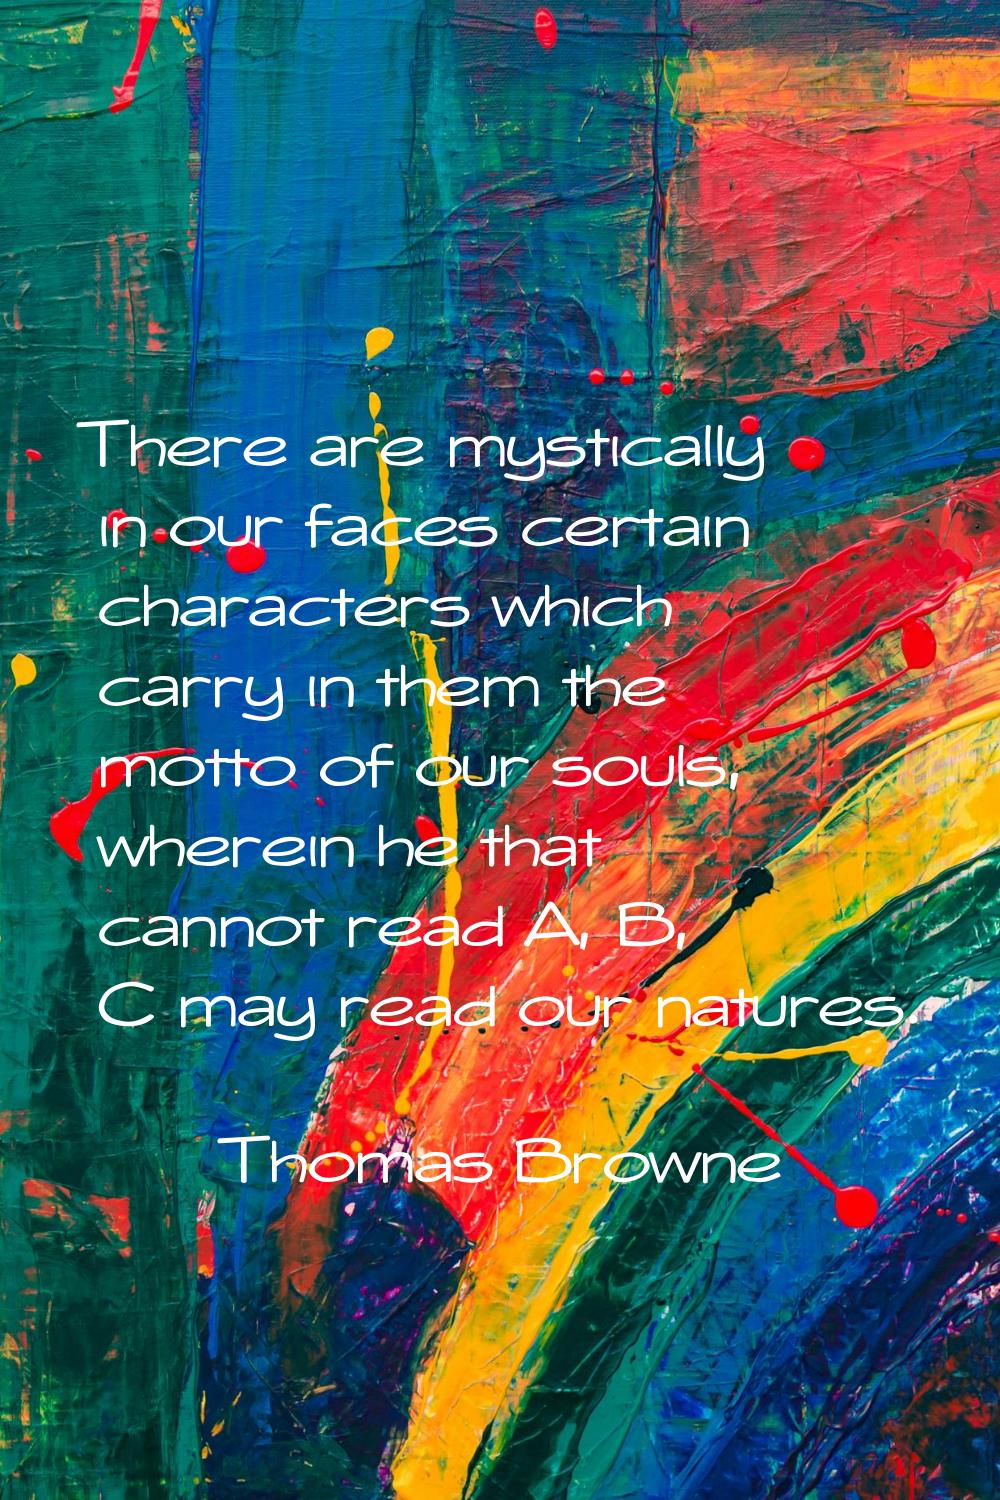 There are mystically in our faces certain characters which carry in them the motto of our souls, wh